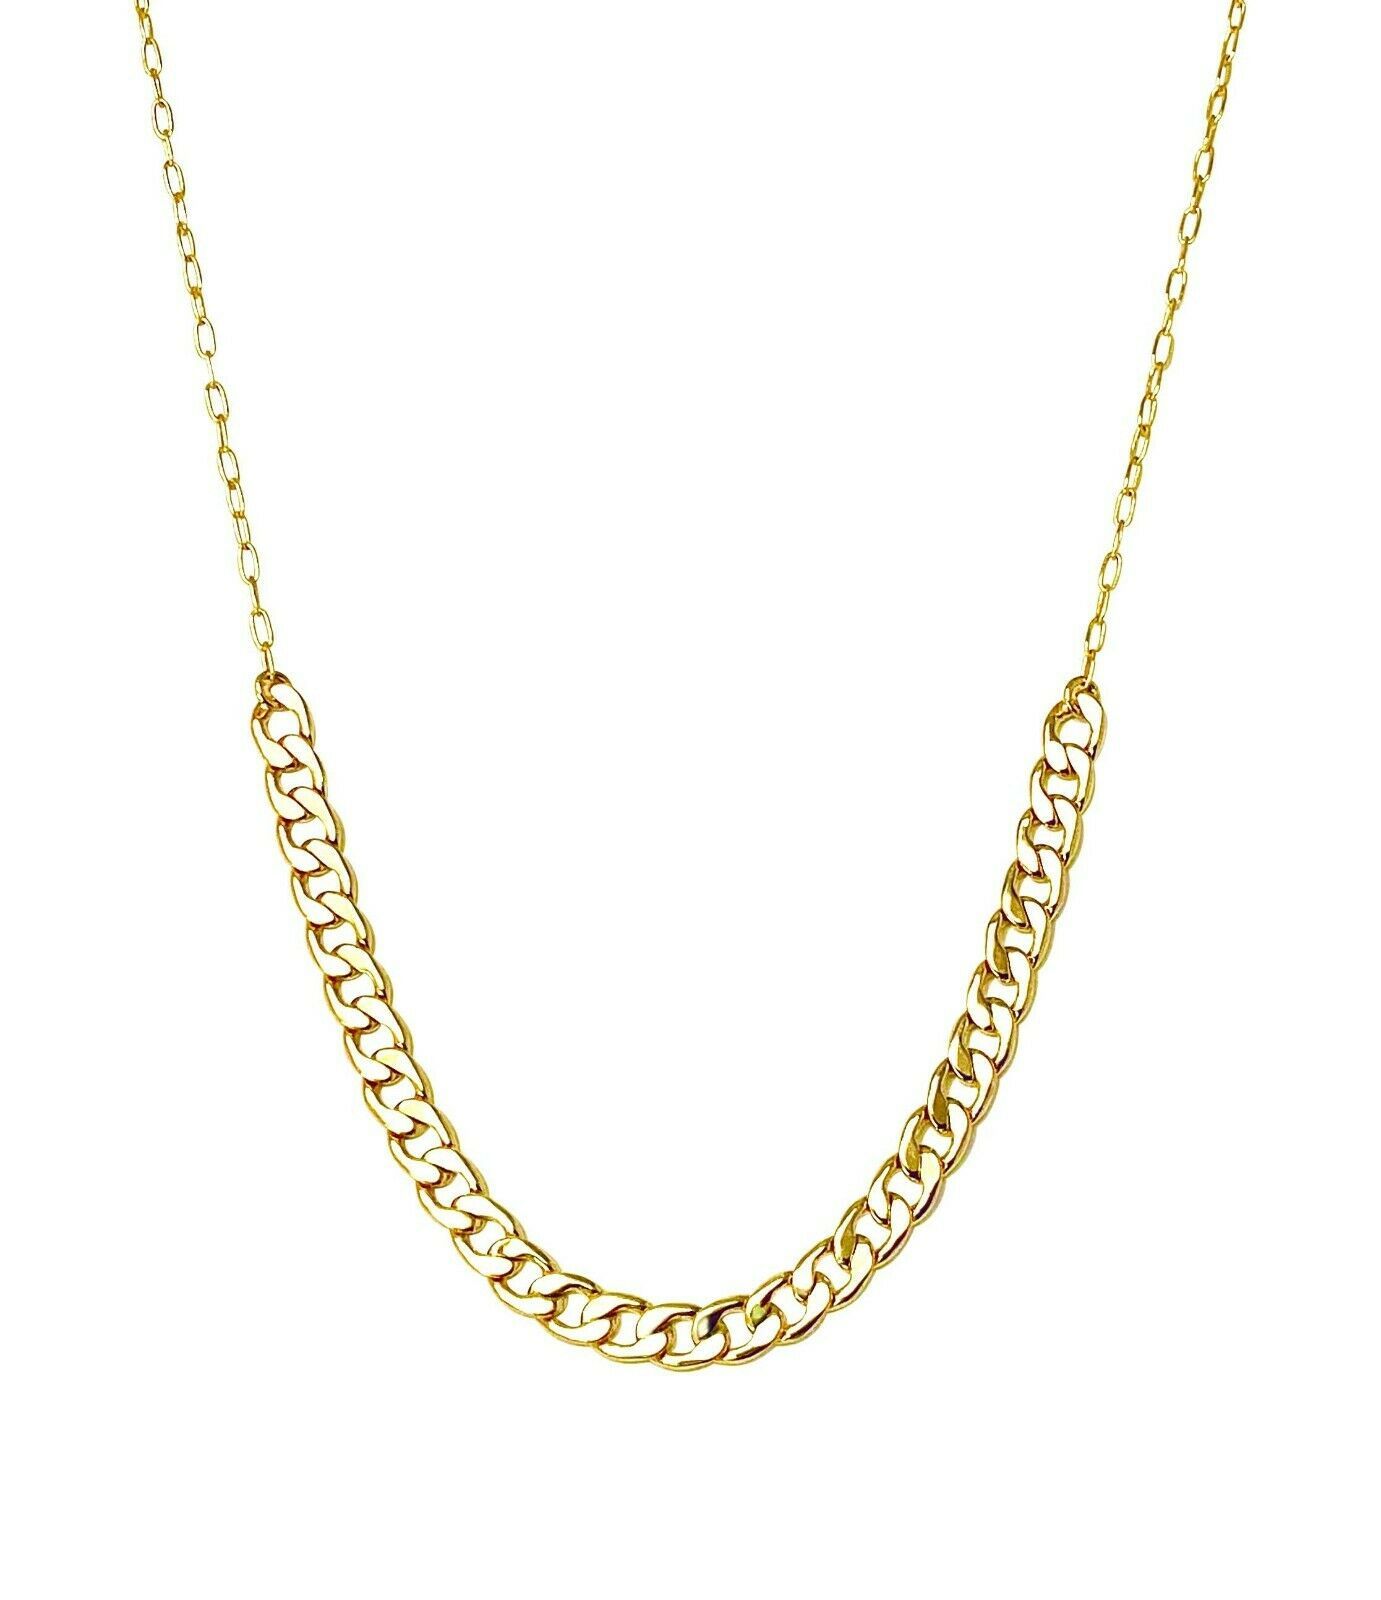 Primary image for Cuban style necklace Gold Necklace Cuban women's ladies beautiful trending style